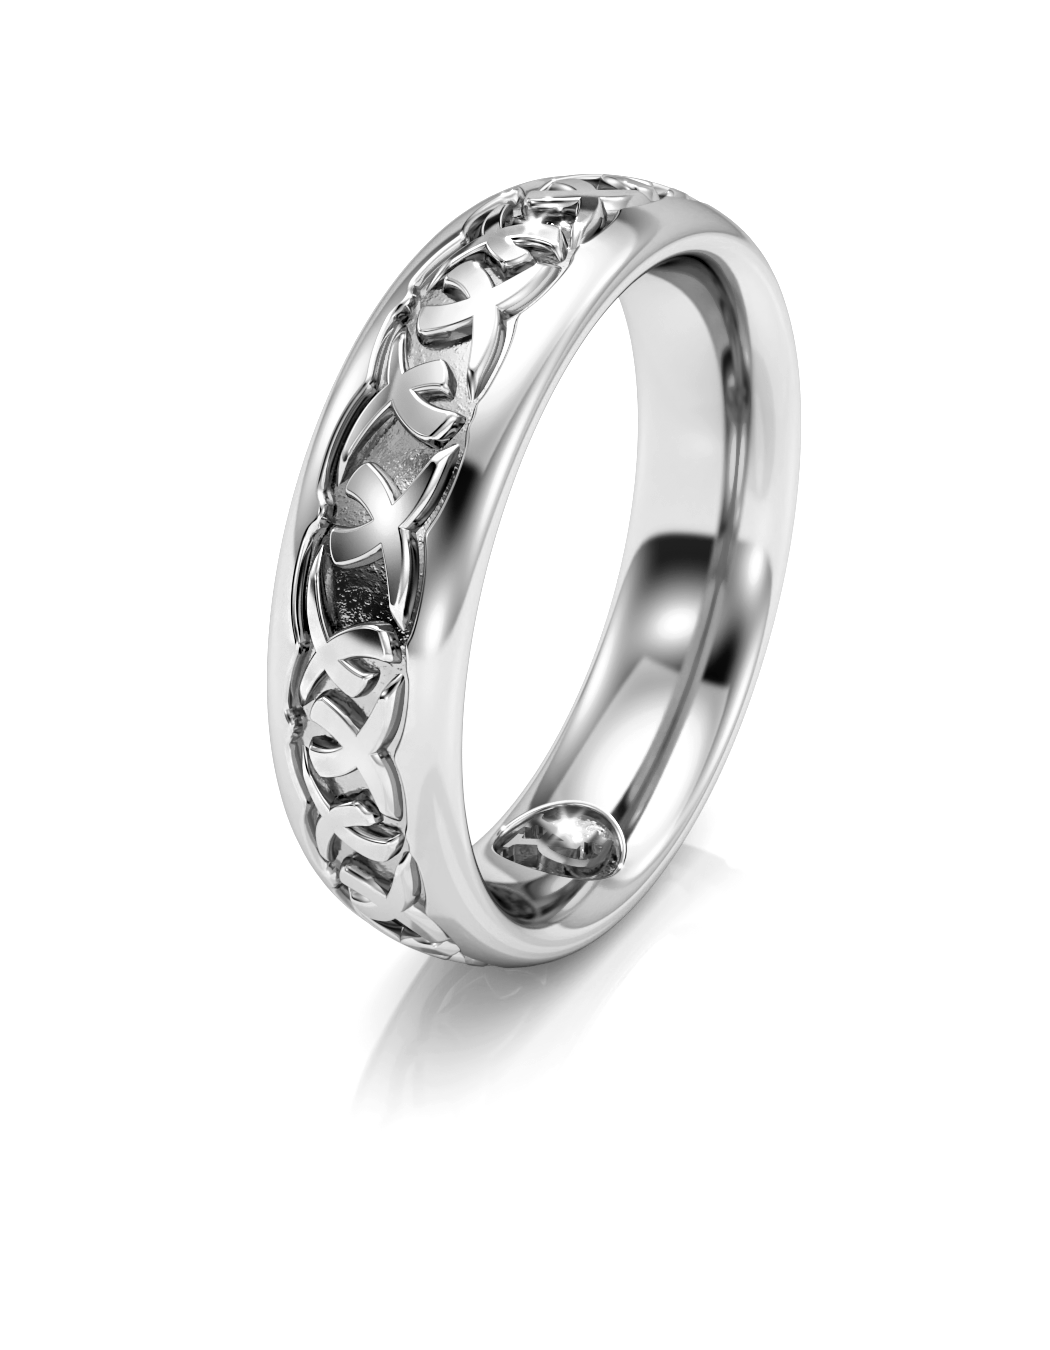 Resilience Ring - 6mm width